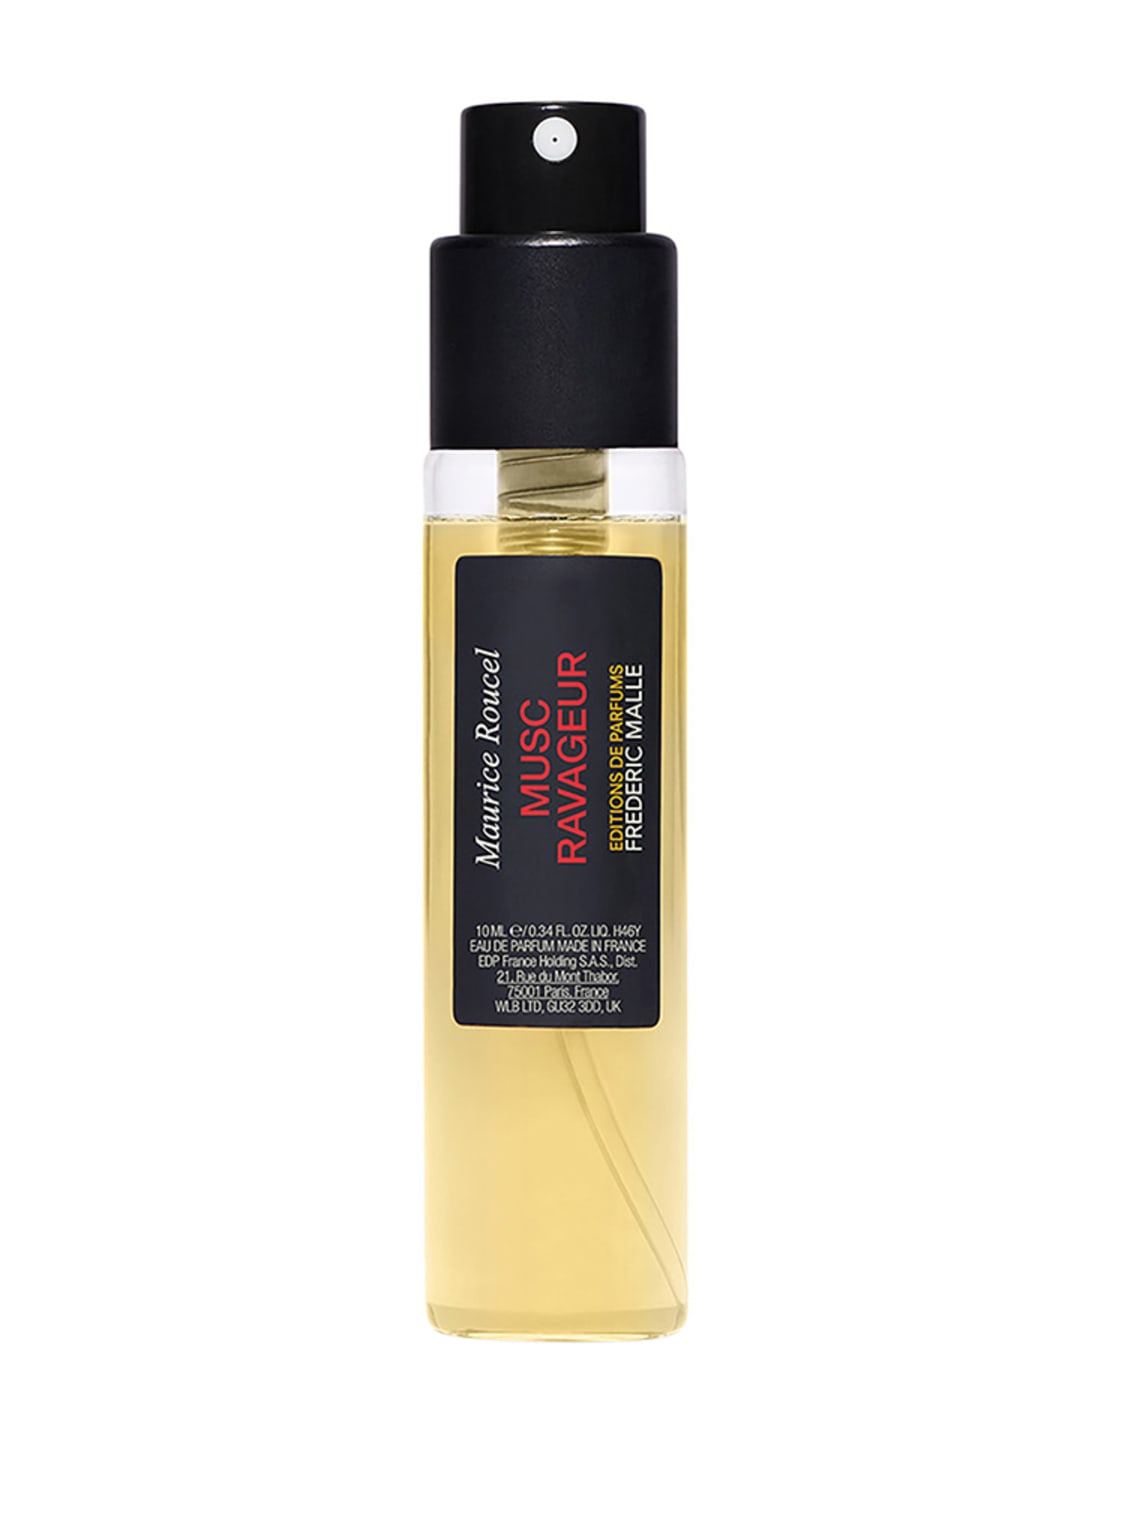 Editions De Parfums Frederic Malle Musc Ravageur Parfum Spray 10 ml von EDITIONS DE PARFUMS FREDERIC MALLE